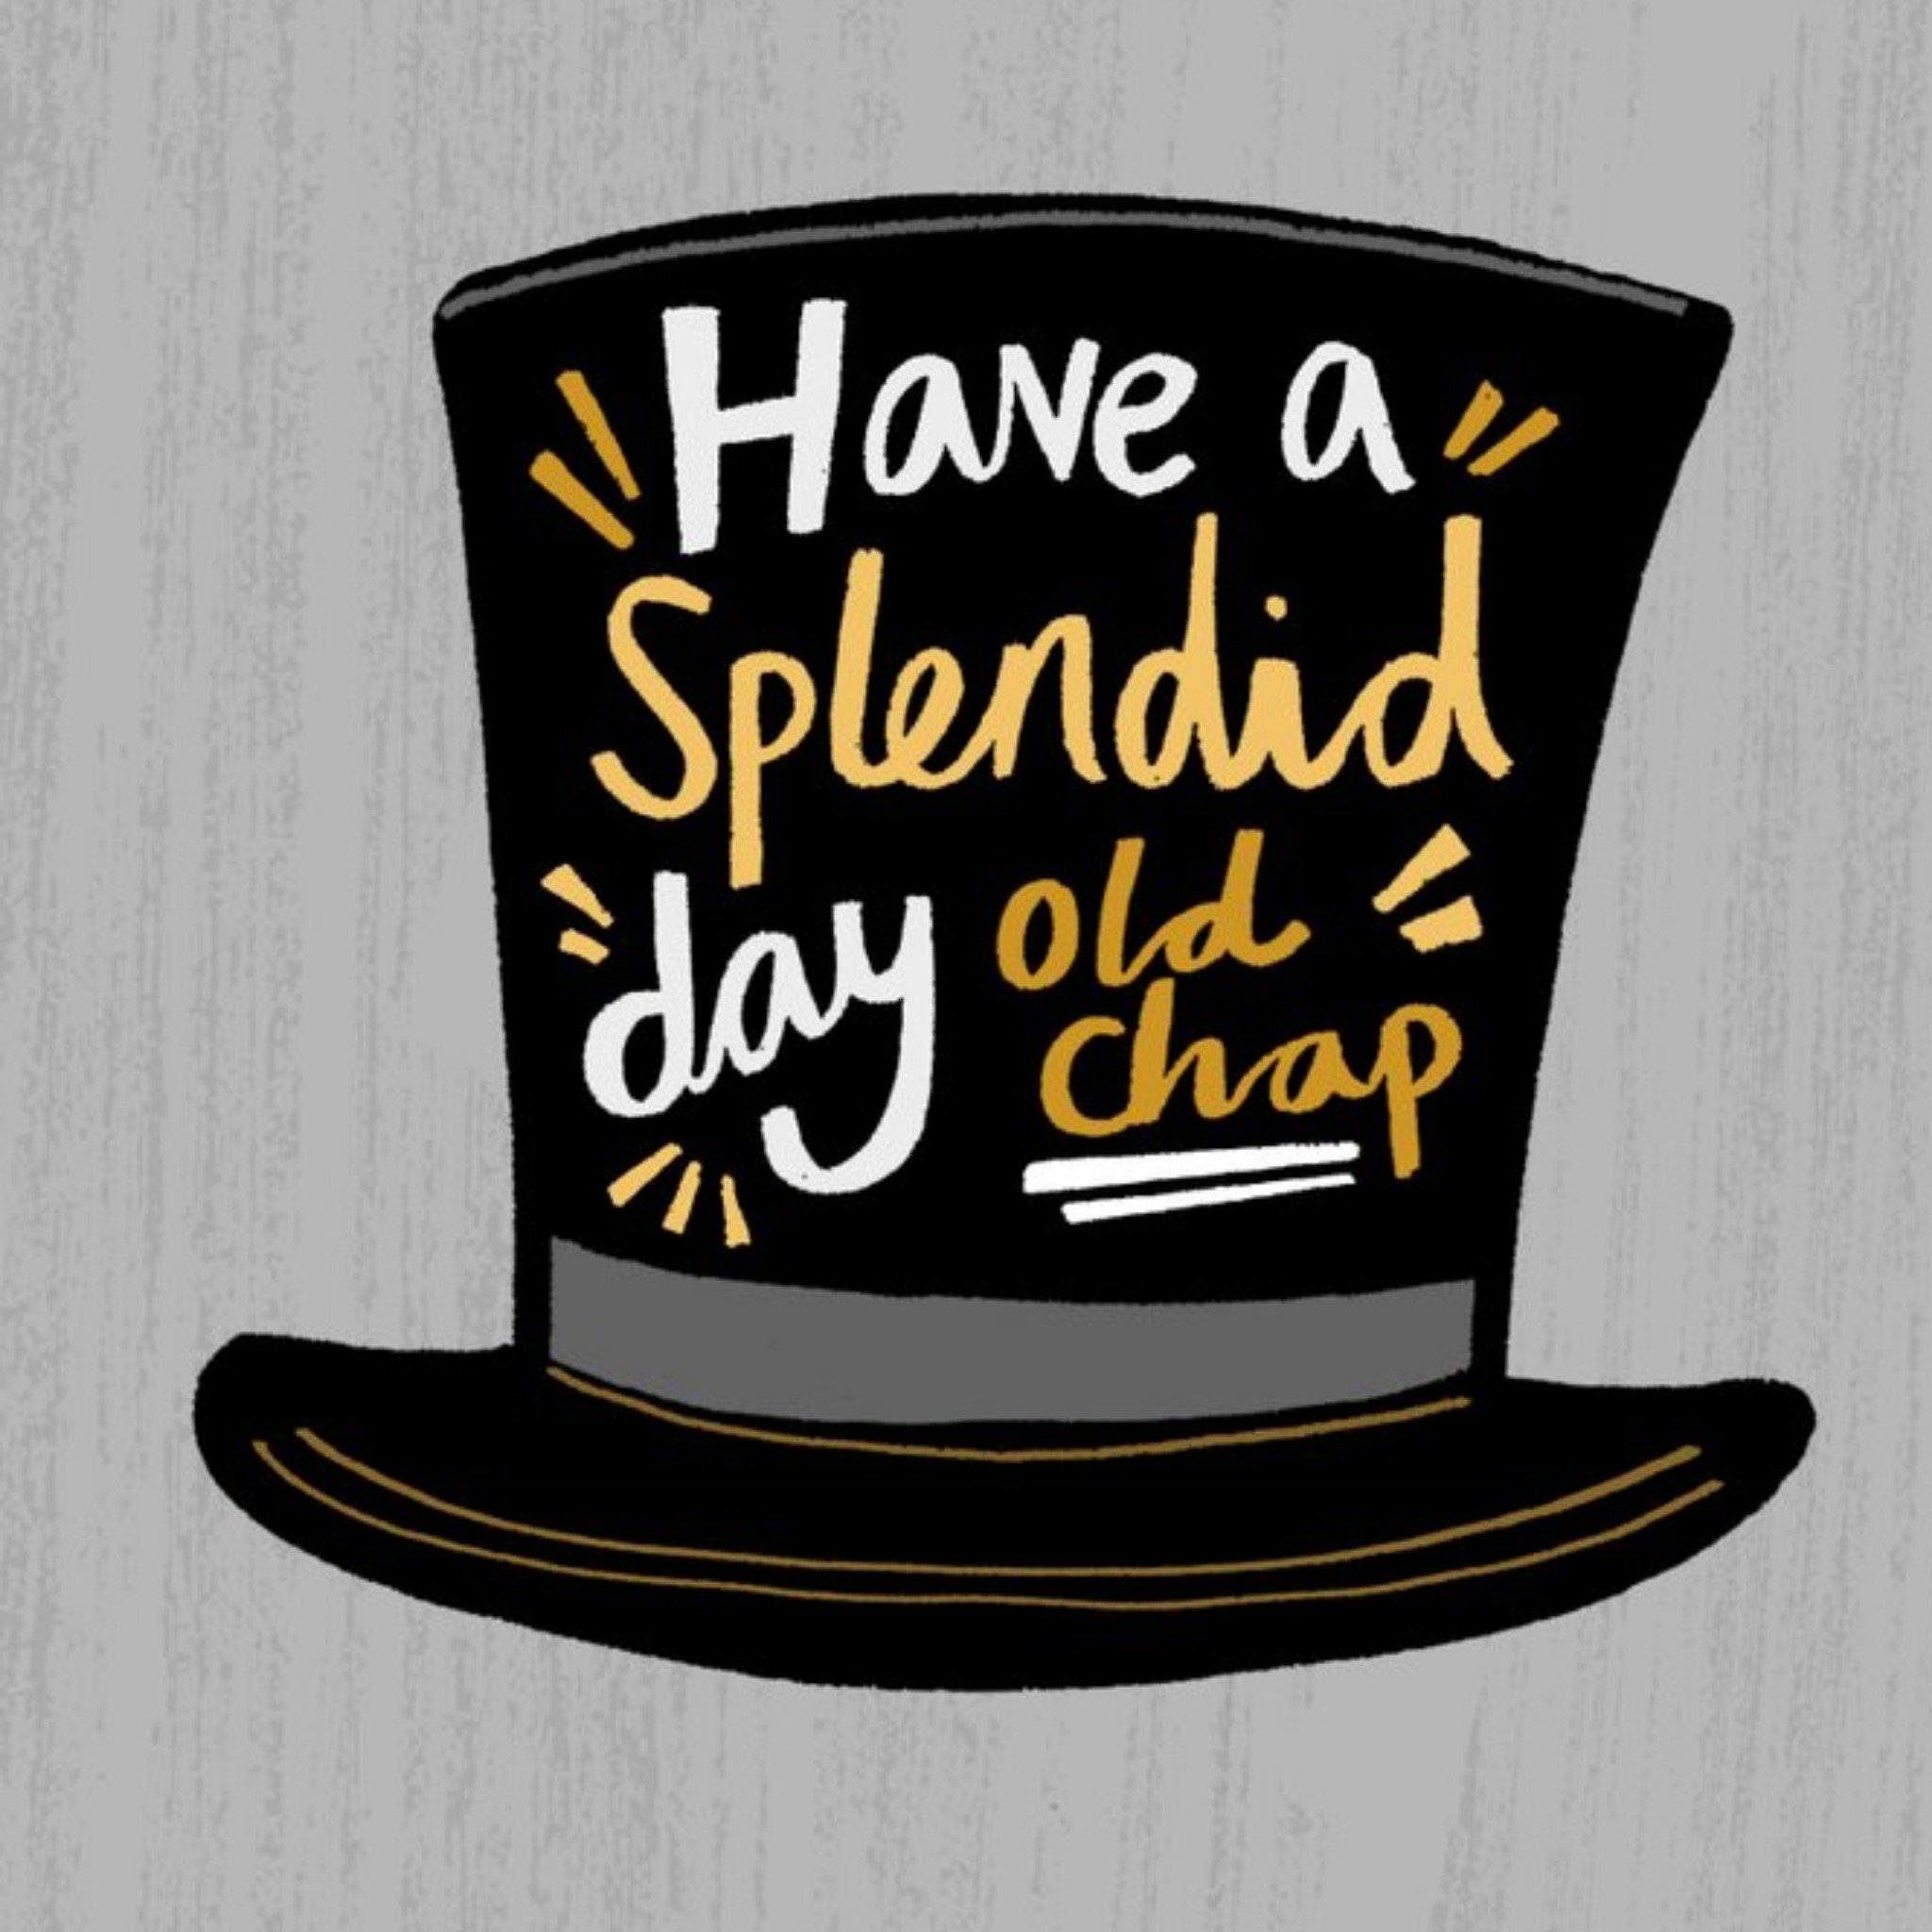 Moonpig Retro Top Hat Have A Splendid Day Old Chap Birthday Card, Square